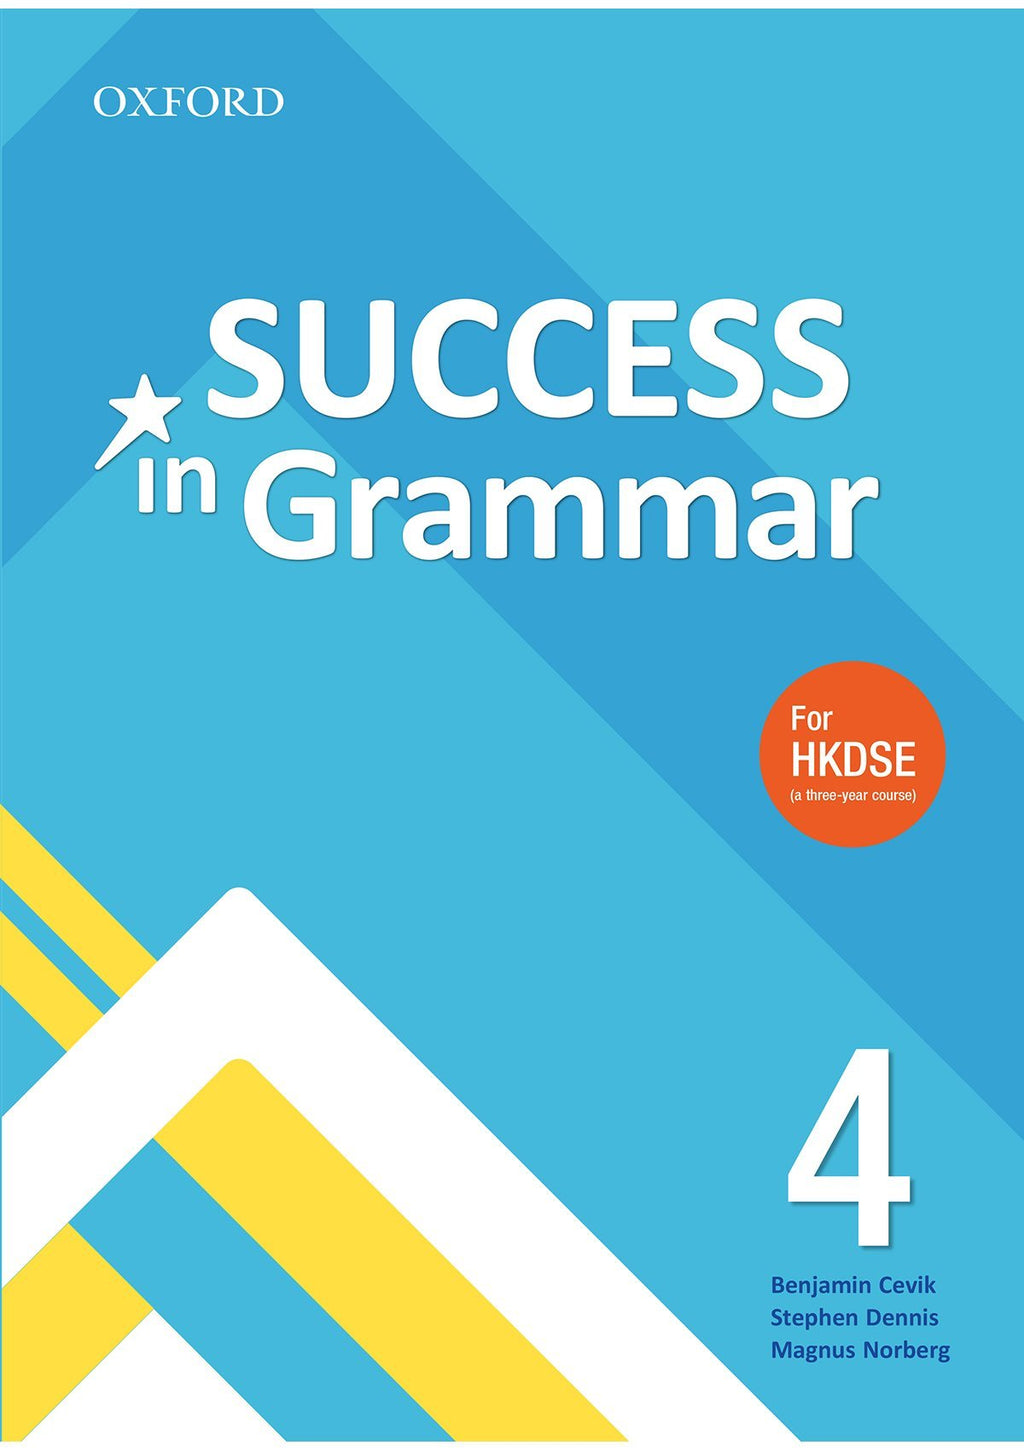 Book　Success　edition)　in　Grammar　Press　University　Student's　(2020　Oxford　(China)　Online　Store